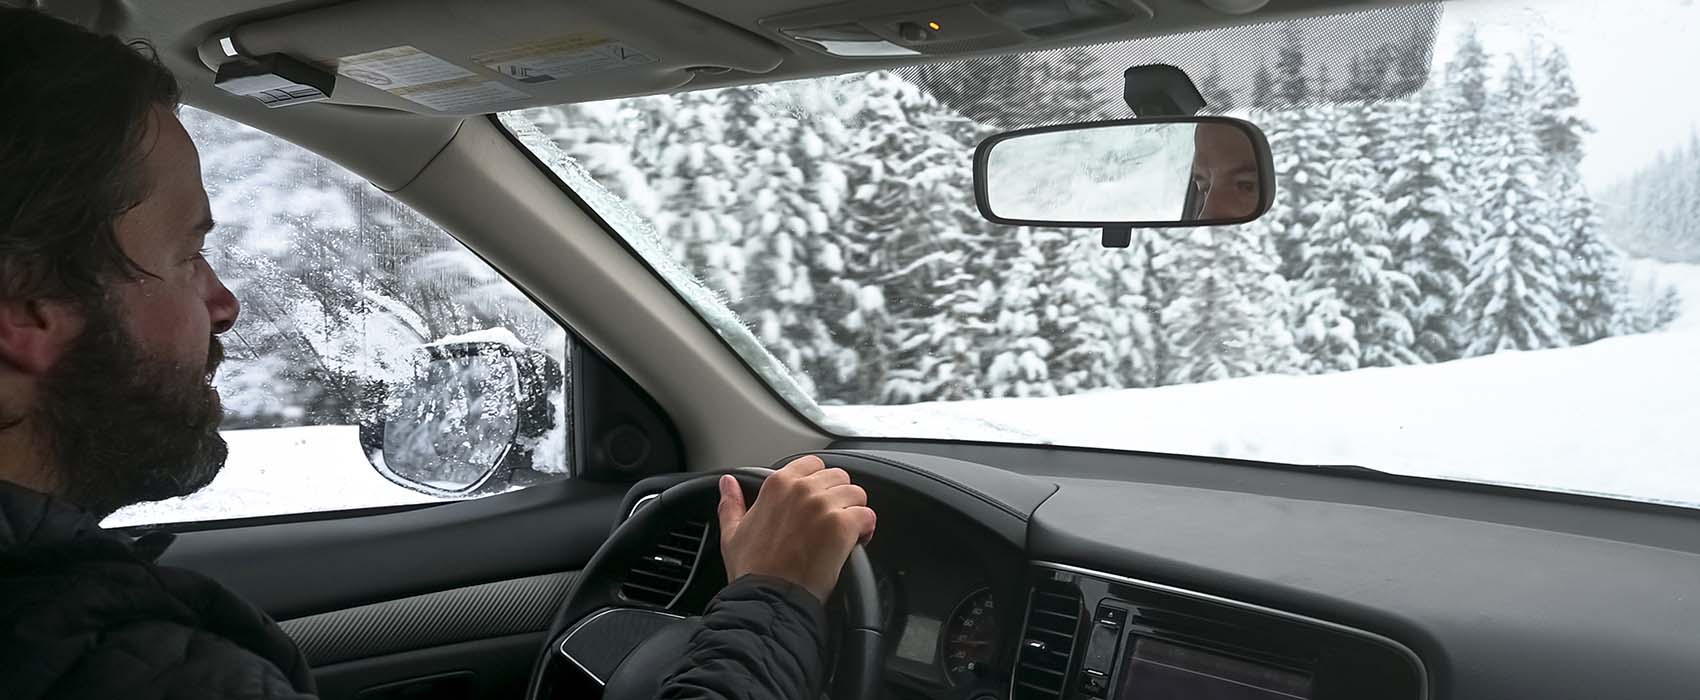 Man driving car through snowy forested road